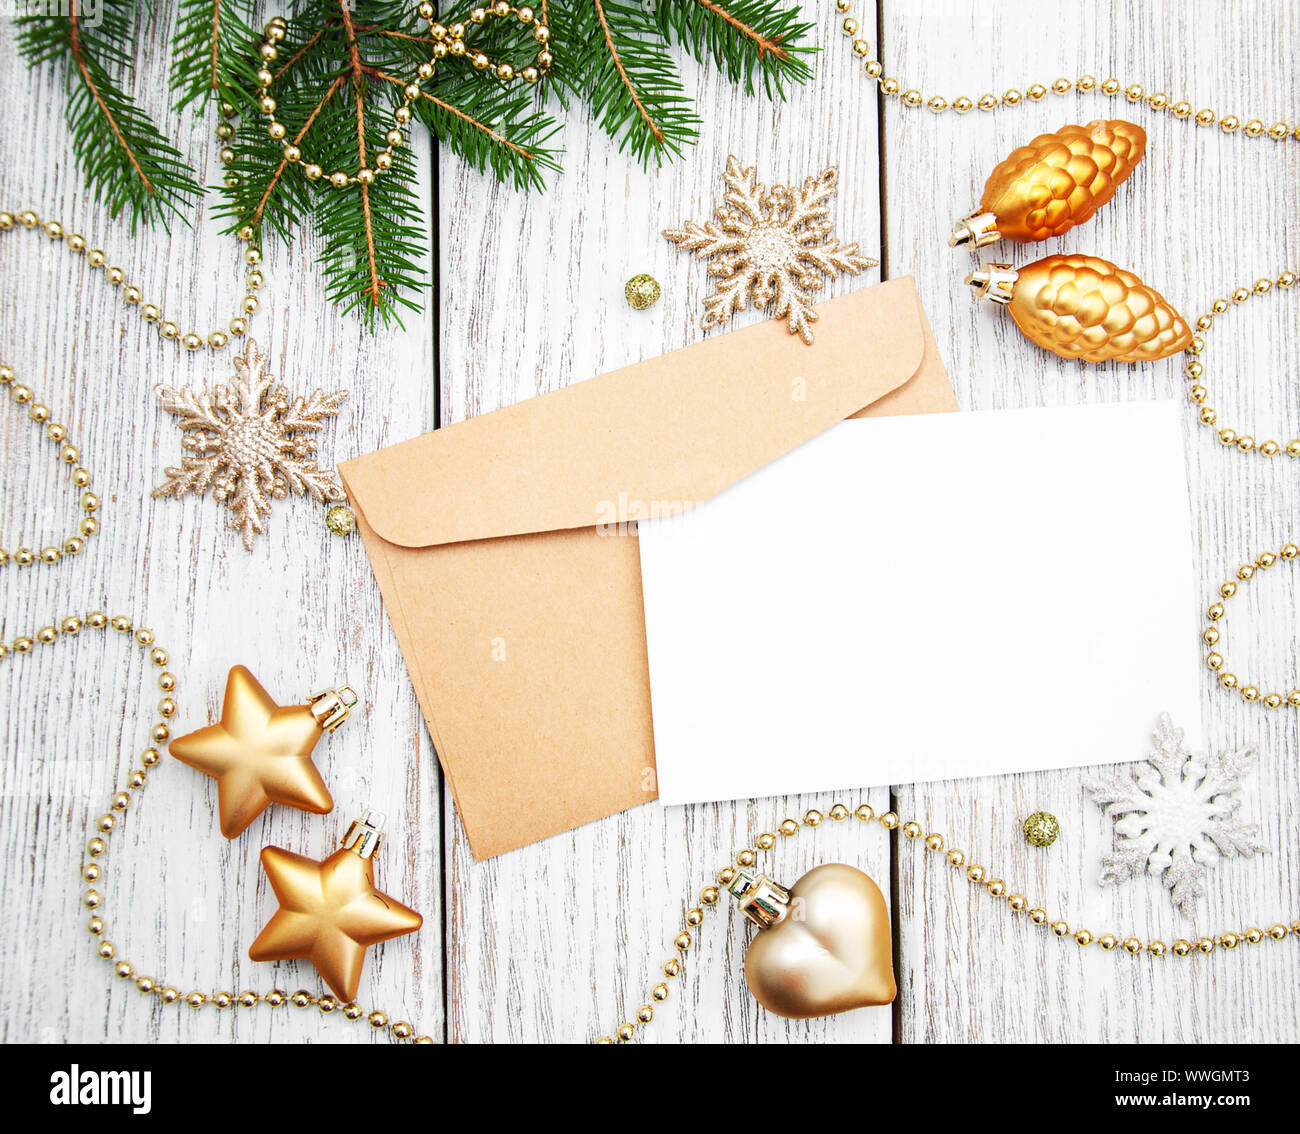 https://c8.alamy.com/comp/WWGMT3/envelope-with-christmas-decoration-on-a-old-wooden-board-WWGMT3.jpg